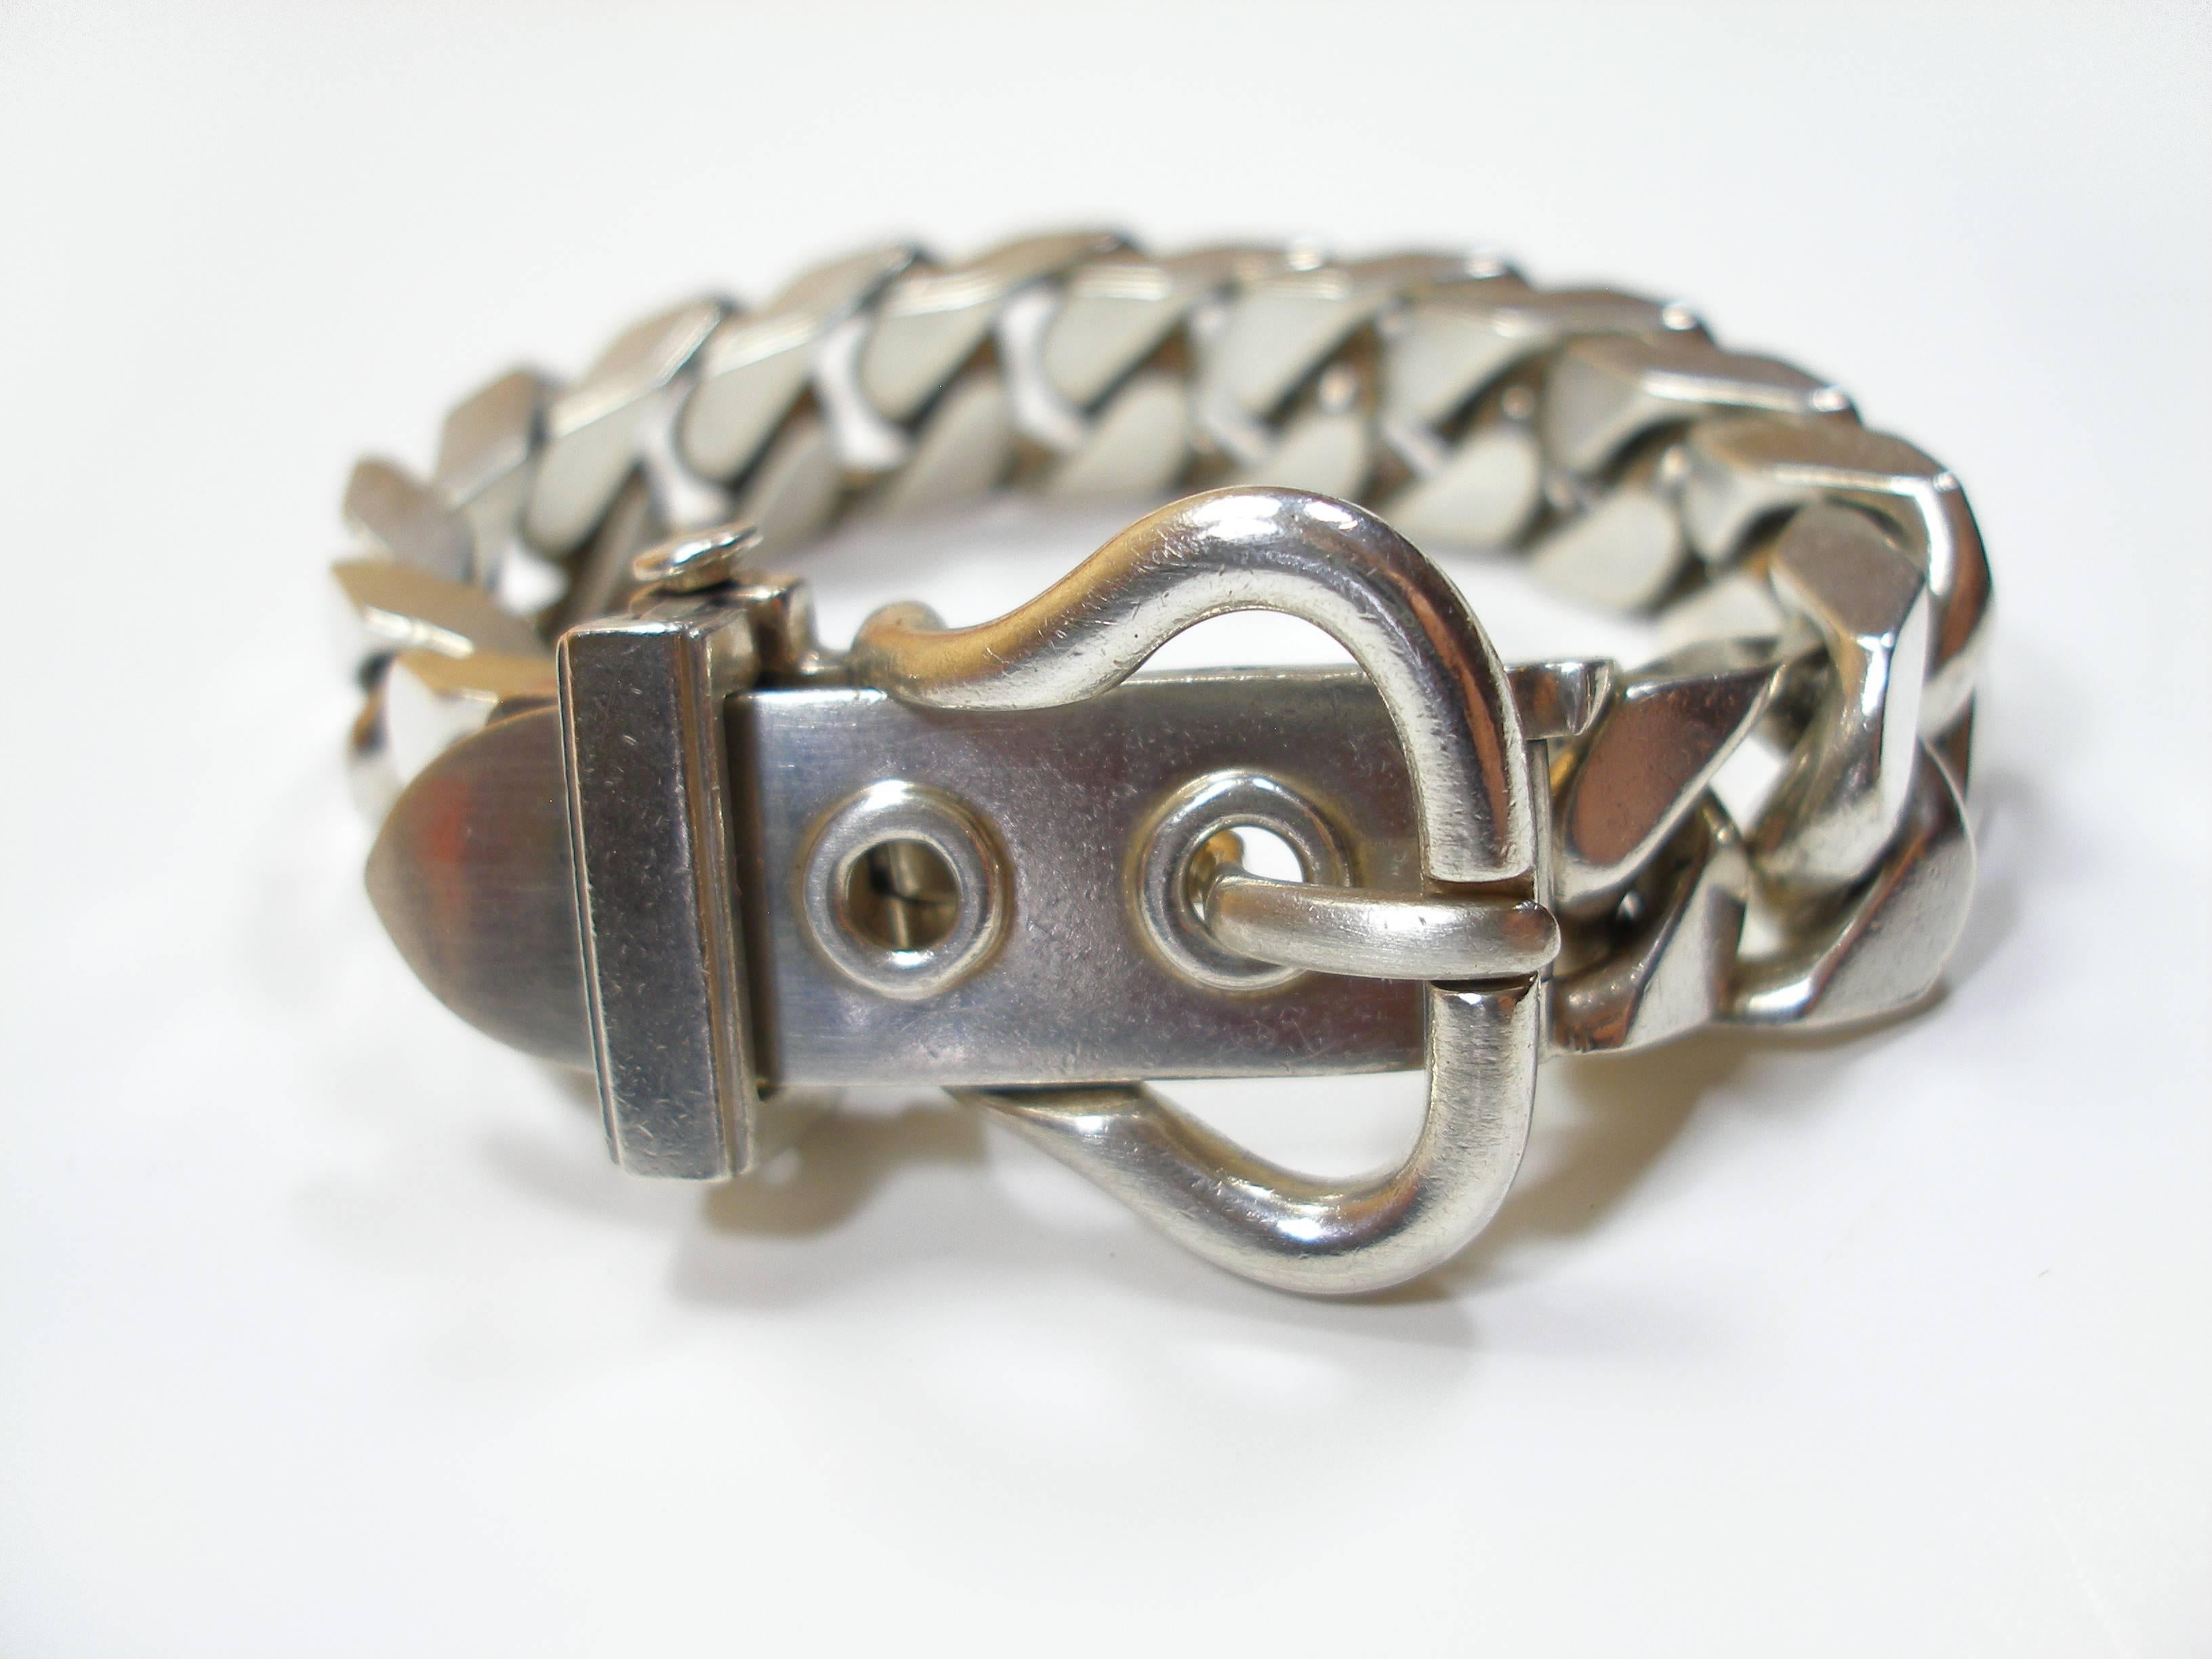 Difficulte to find in this size 
Vintage and collector / Sold out in shop 
Large Hermes Sterling Silver Buckle Motif Bracelet. 
The bracelet measures 23 cm or 9.05 end to end.
2 possible fasteners :  20 cm or 7.87 " and 21 cm or 8.26 "
The